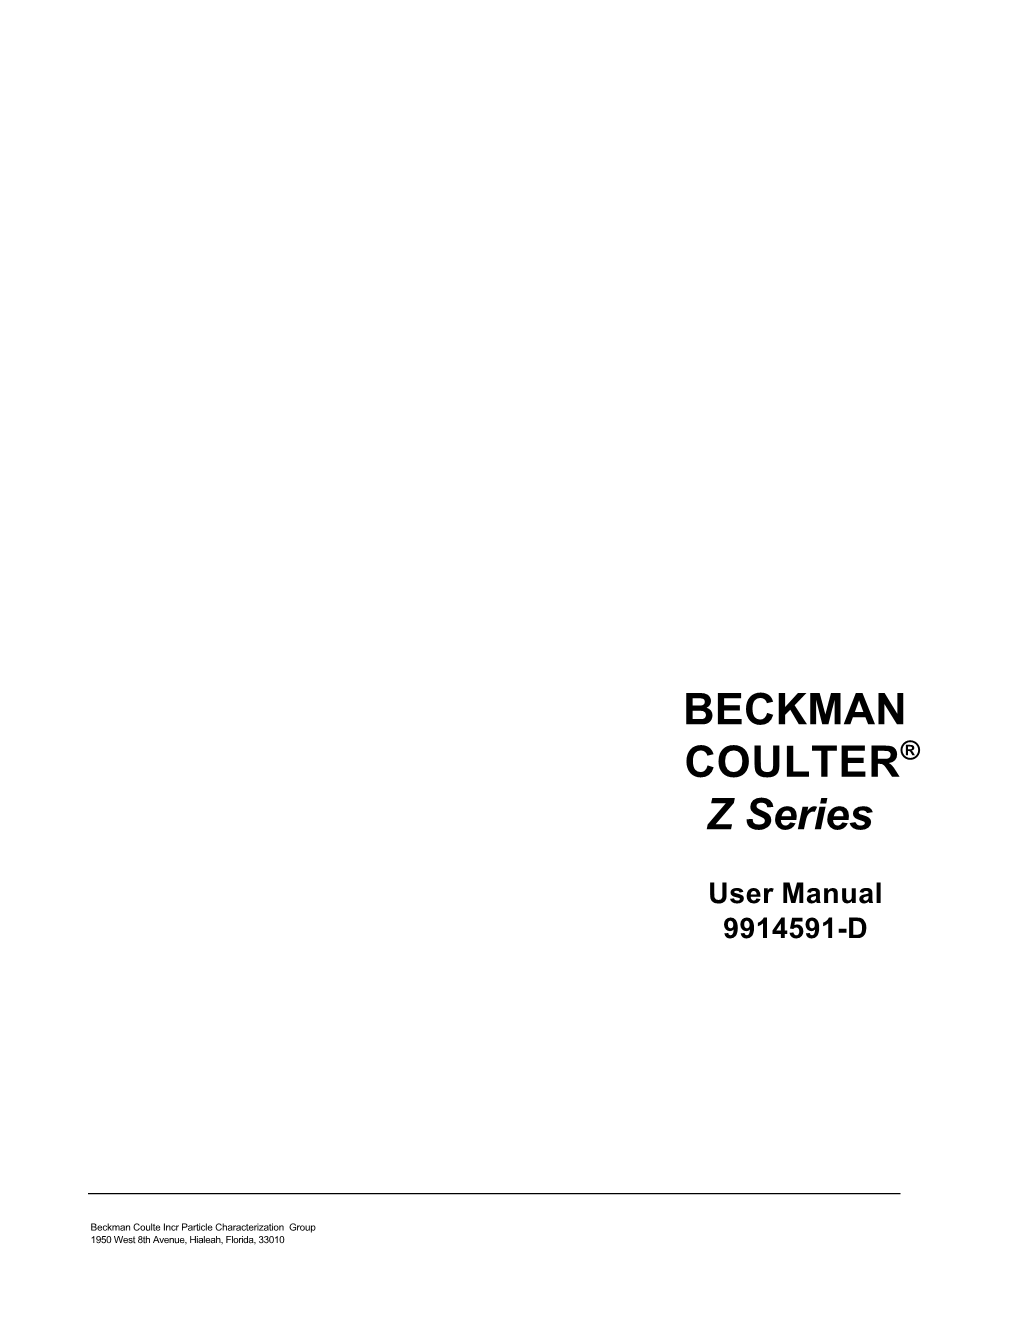 BECKMAN COULTER Z Series Location Requirements